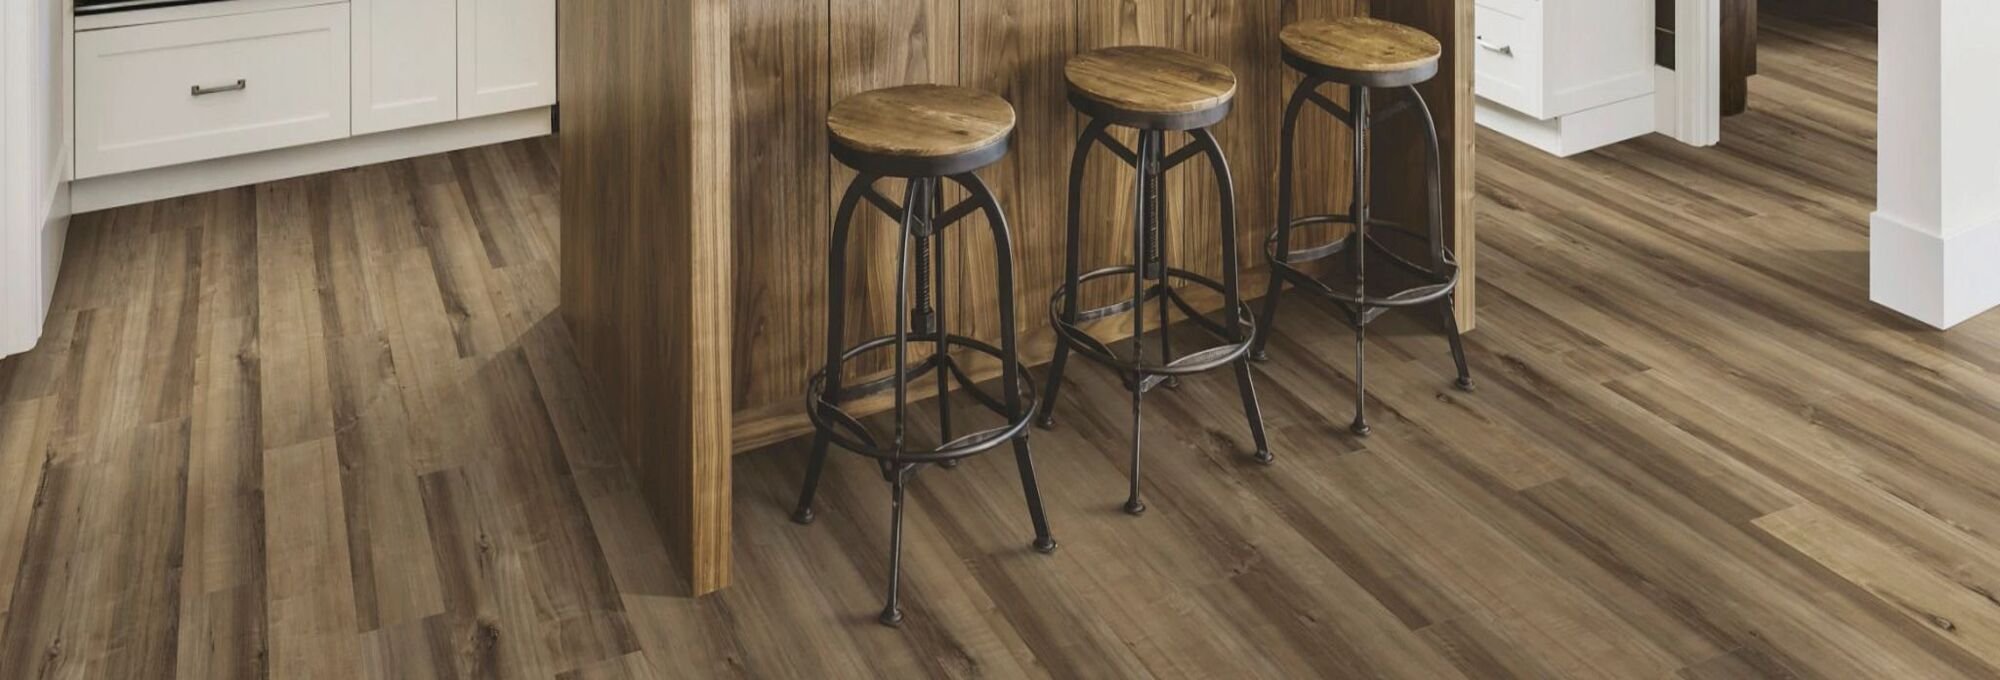 Island in kitchen with vinyl flooring from Floors Of Wilmington in the Wilmington, NC area